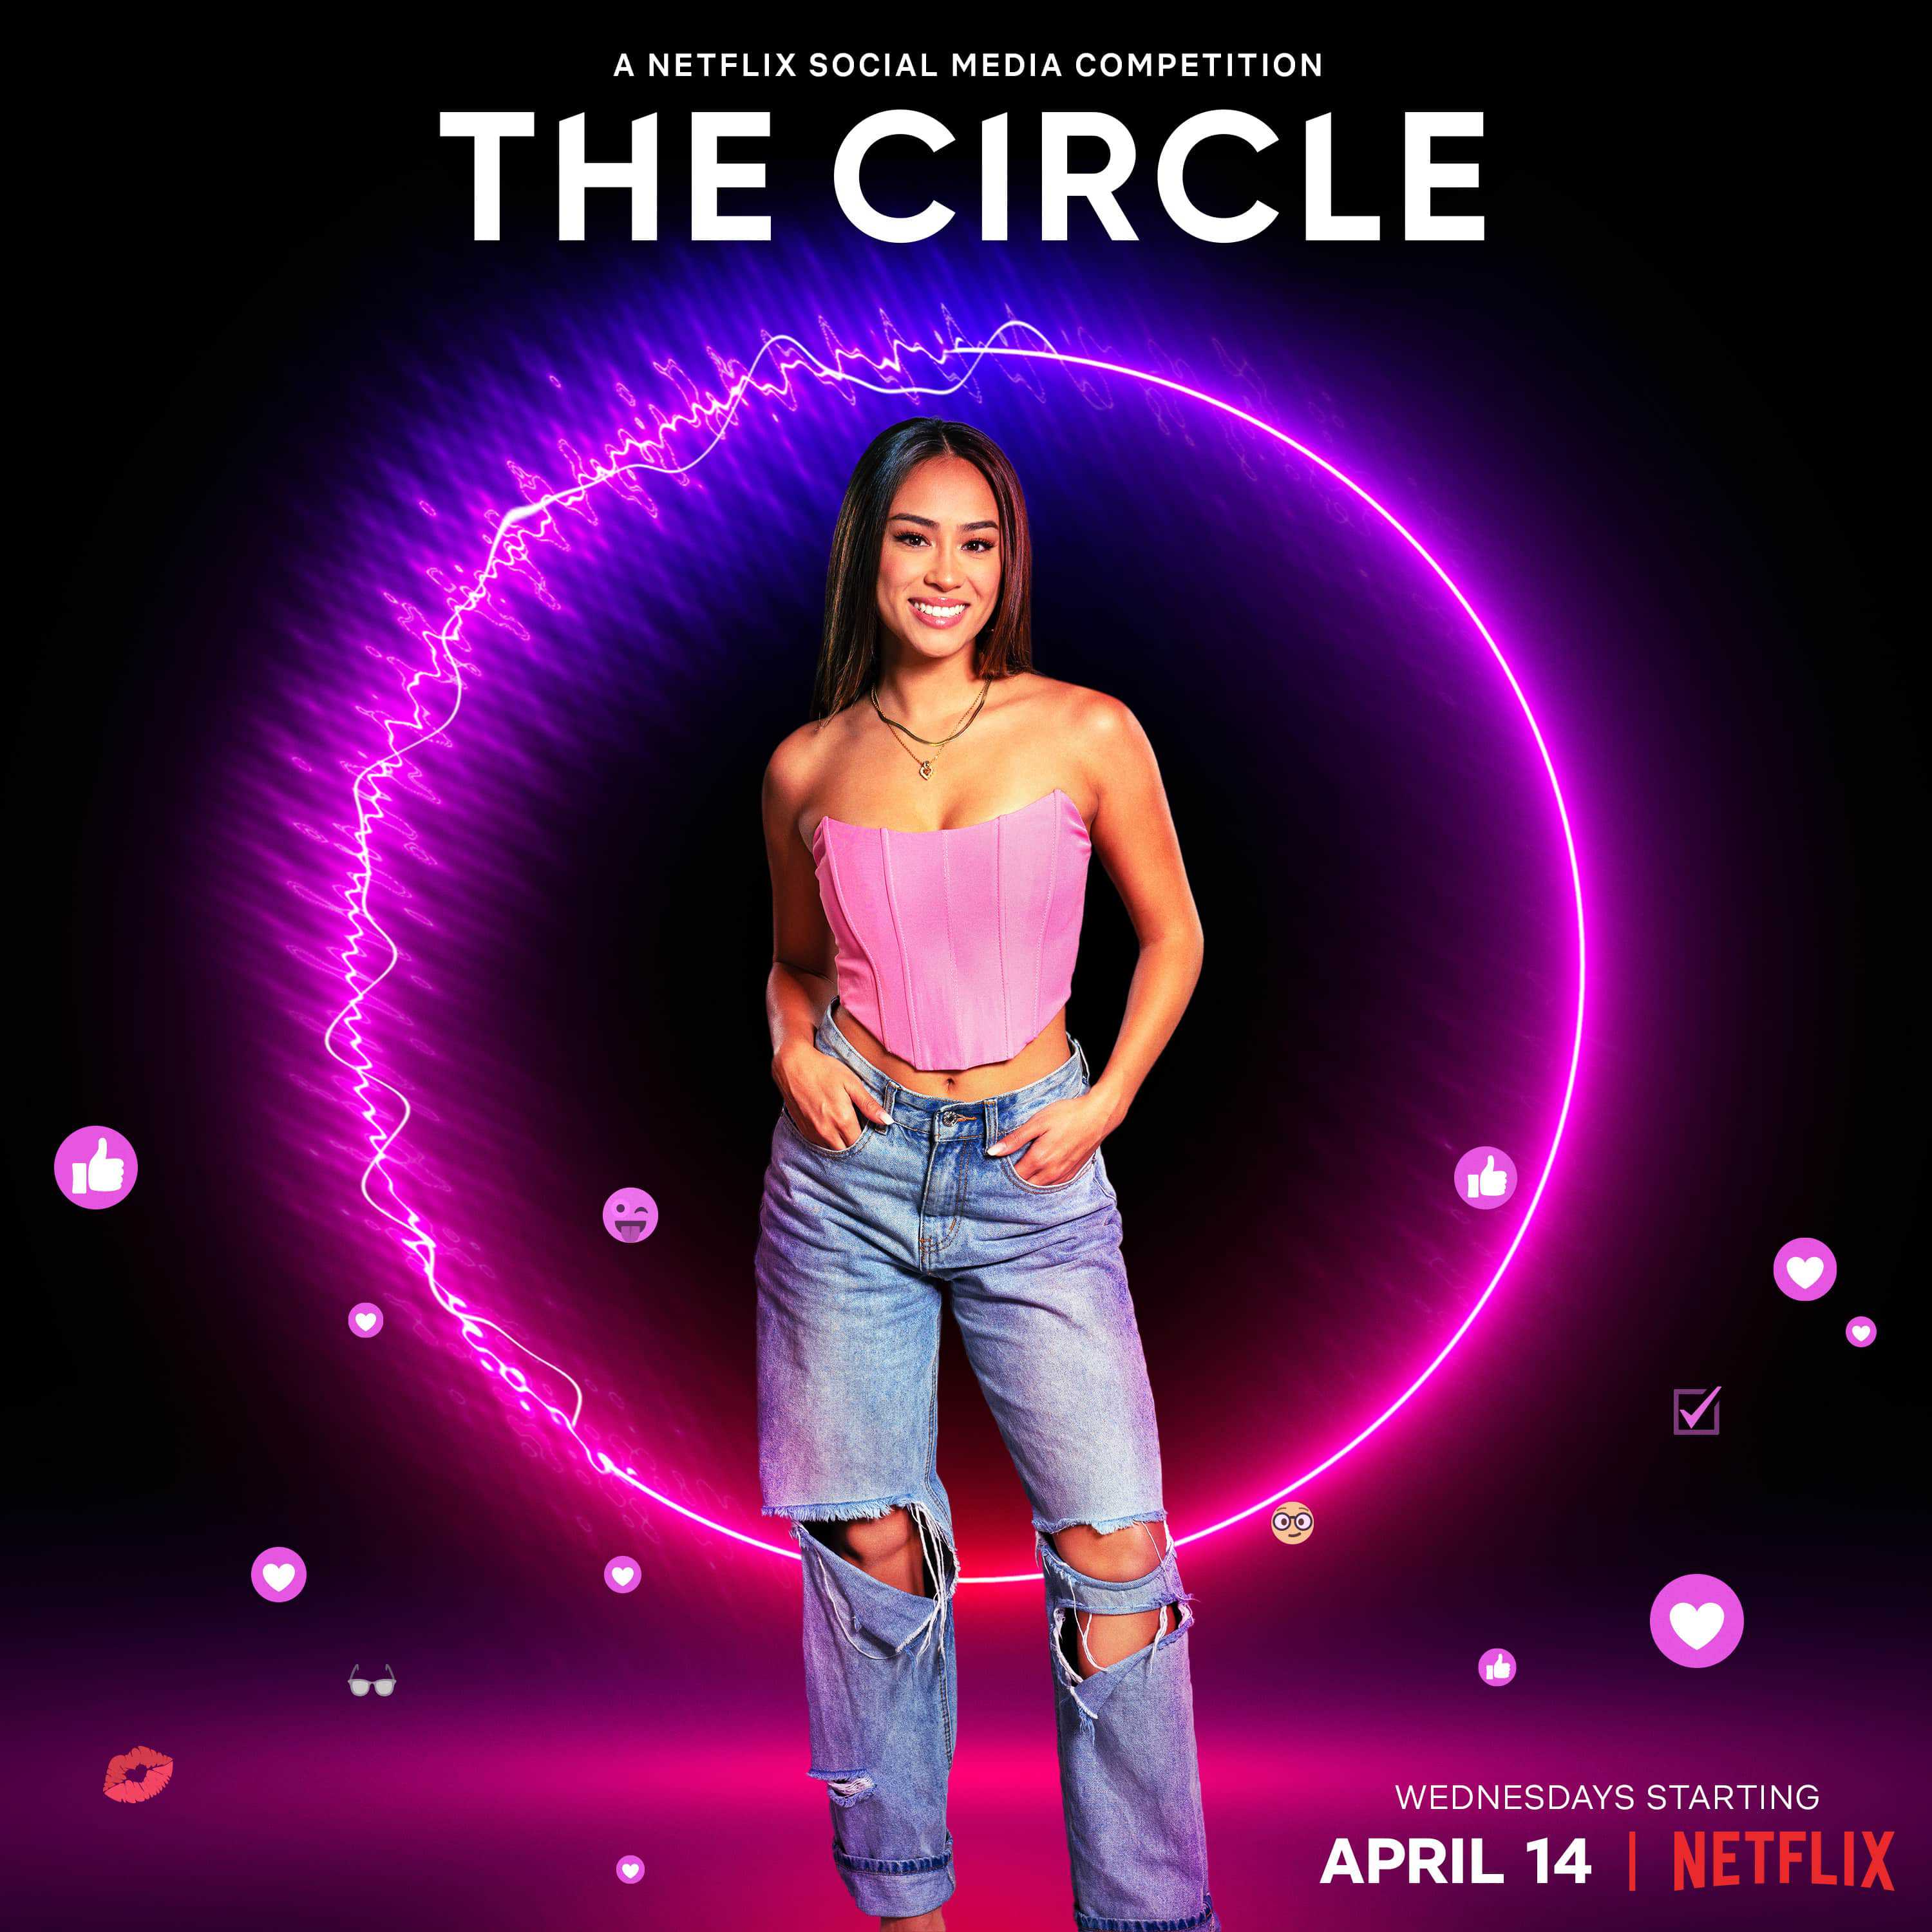 Savannah in promotional material for The Circle Season 2